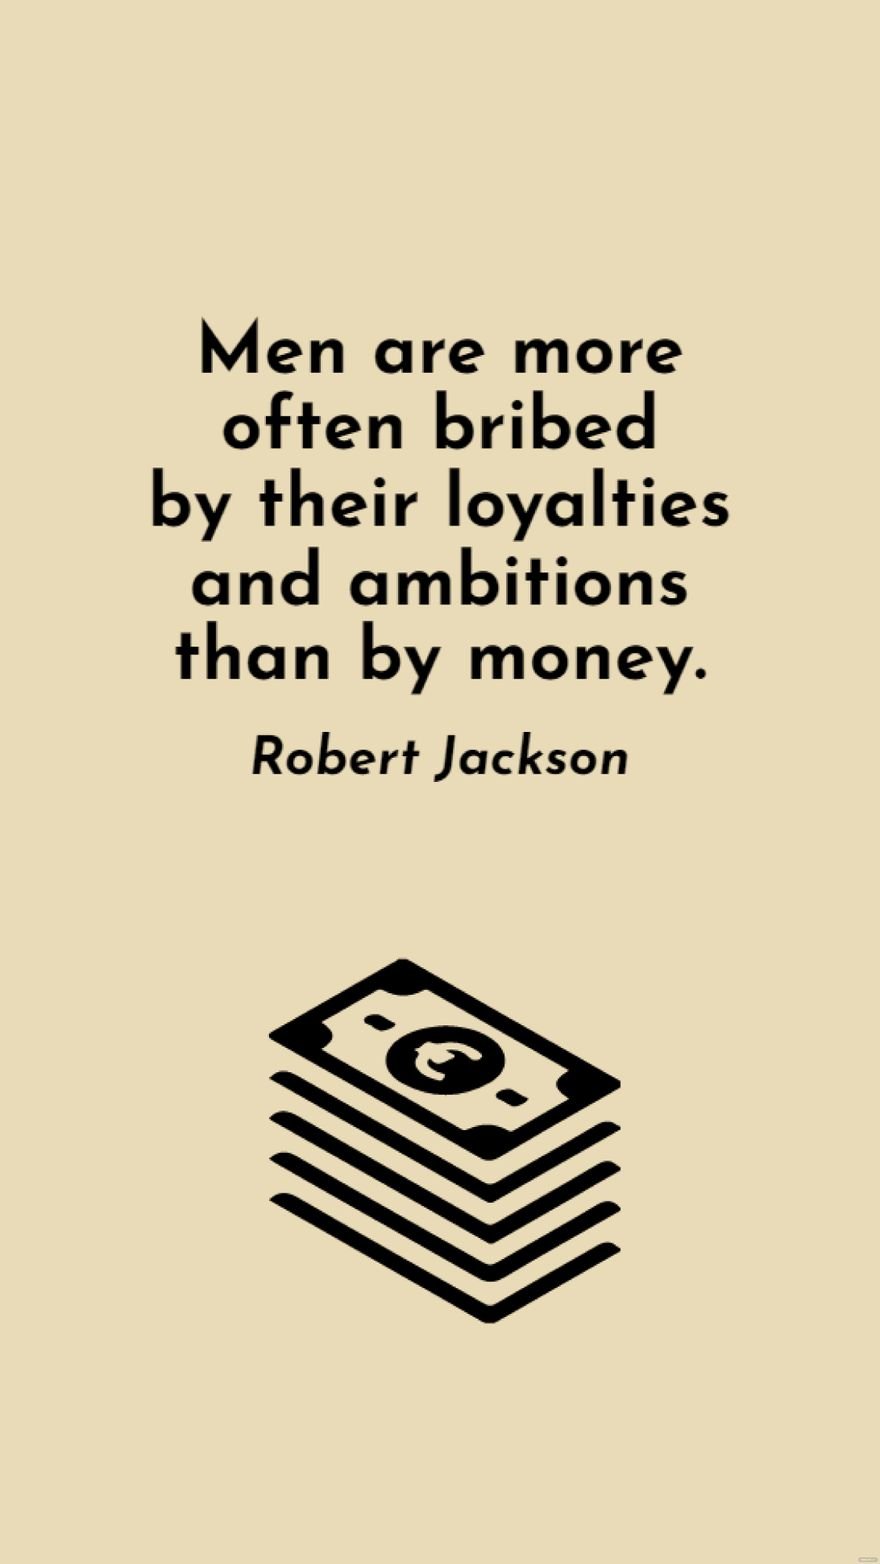 Free Robert Jackson - Men are more often bribed by their loyalties and ambitions than by money. in JPG